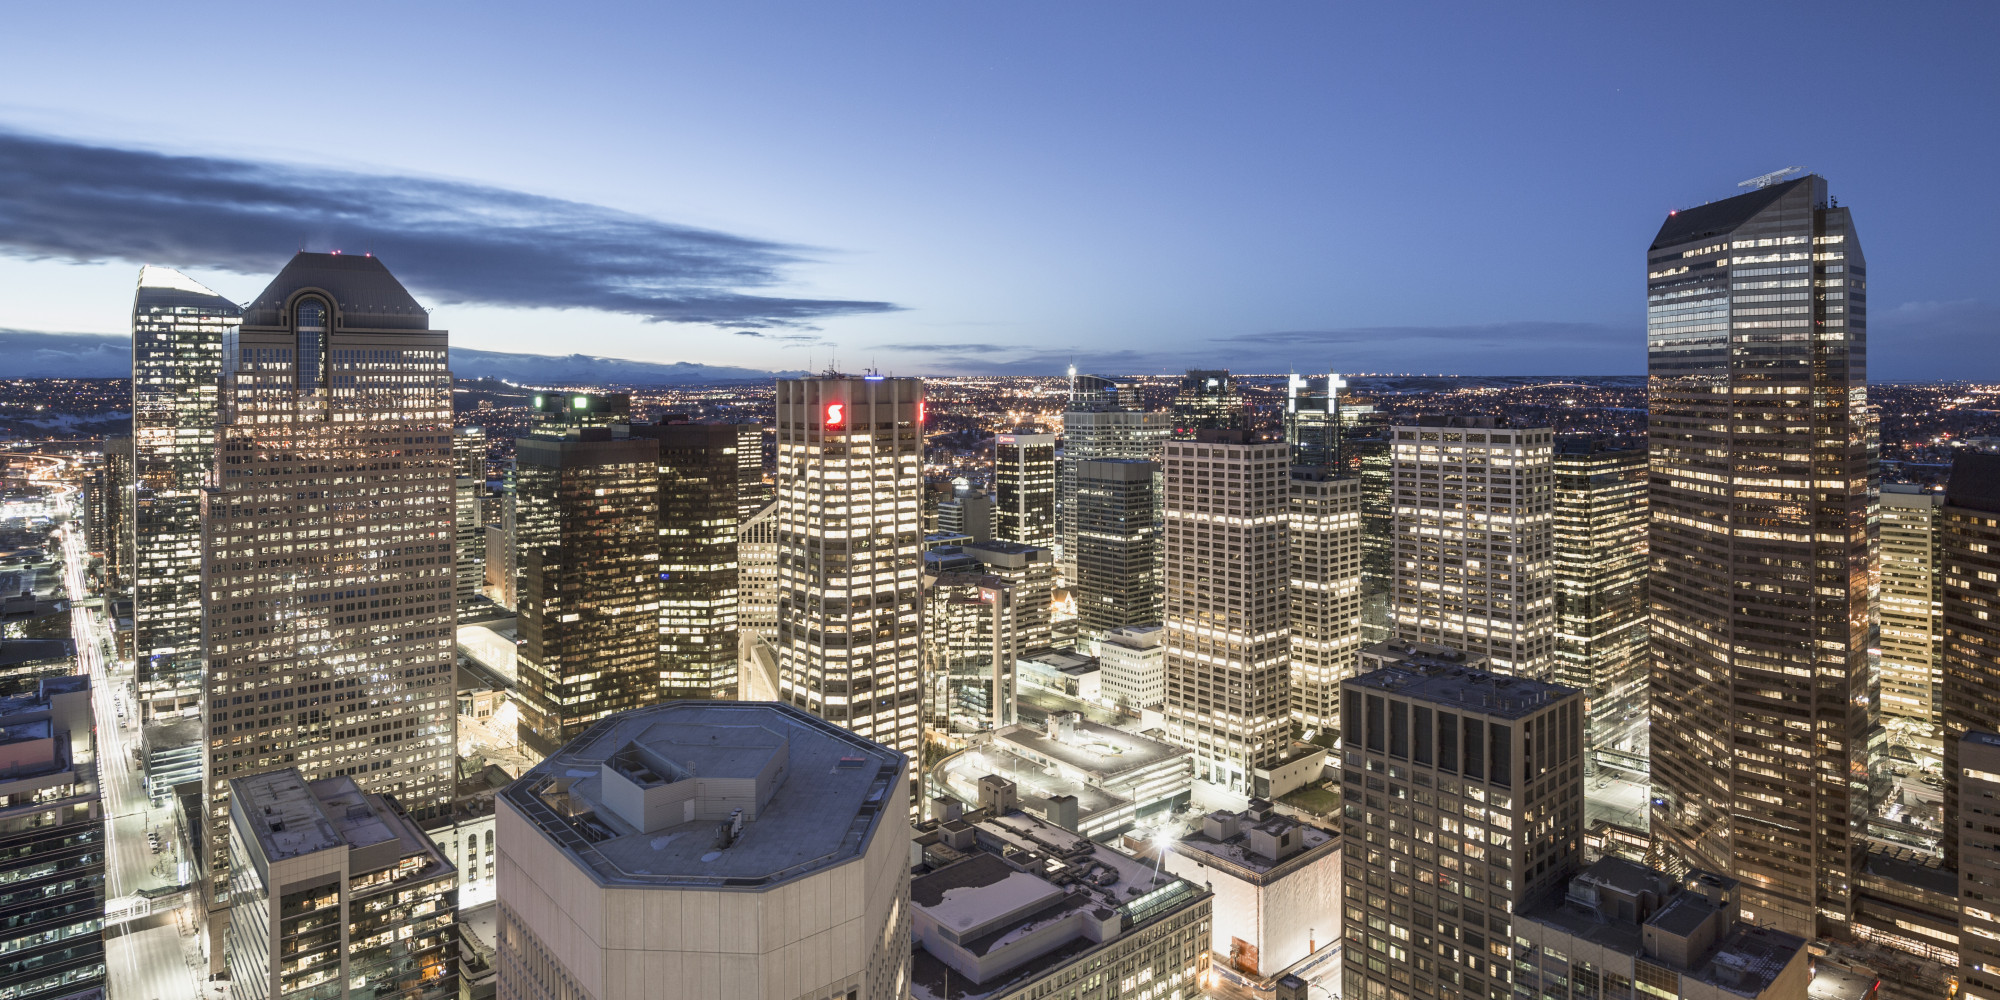 Is Calgary The Next Detroit? Bankruptcy Fears As Cities Share Similarities2000 x 1000